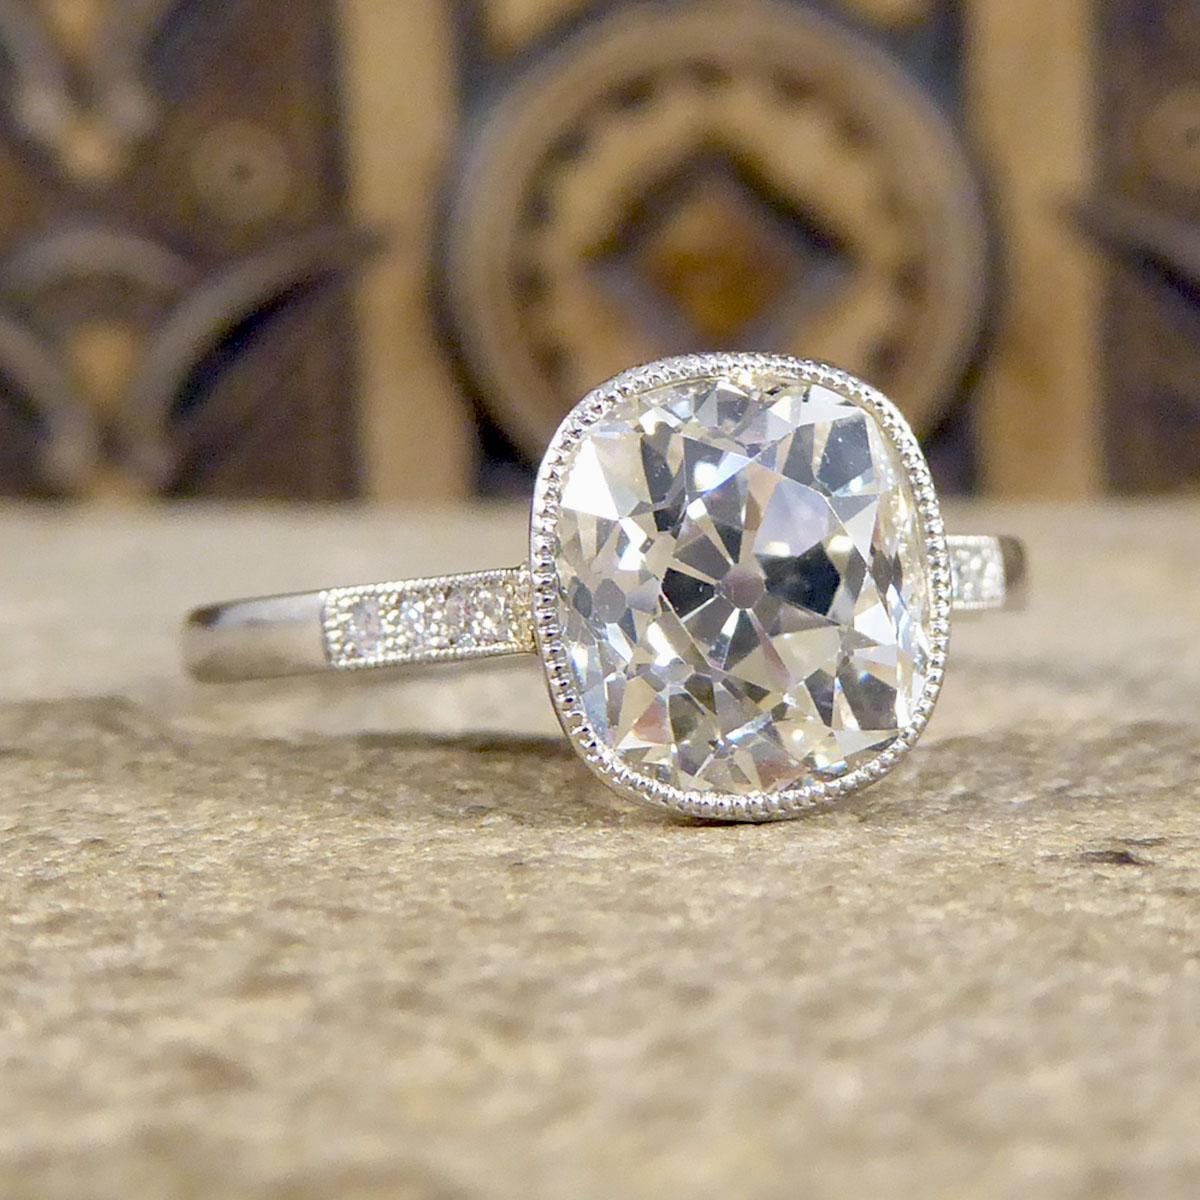 This beautifully sparkly engagement ring holds Old Cushion Cut Diamond weighing 2.35ct and is set in Platinum millegrain-edged rub over collar setting with a cut out Diamonds shaped wire gallery. A classic solitaire ring with an Edwardian style that